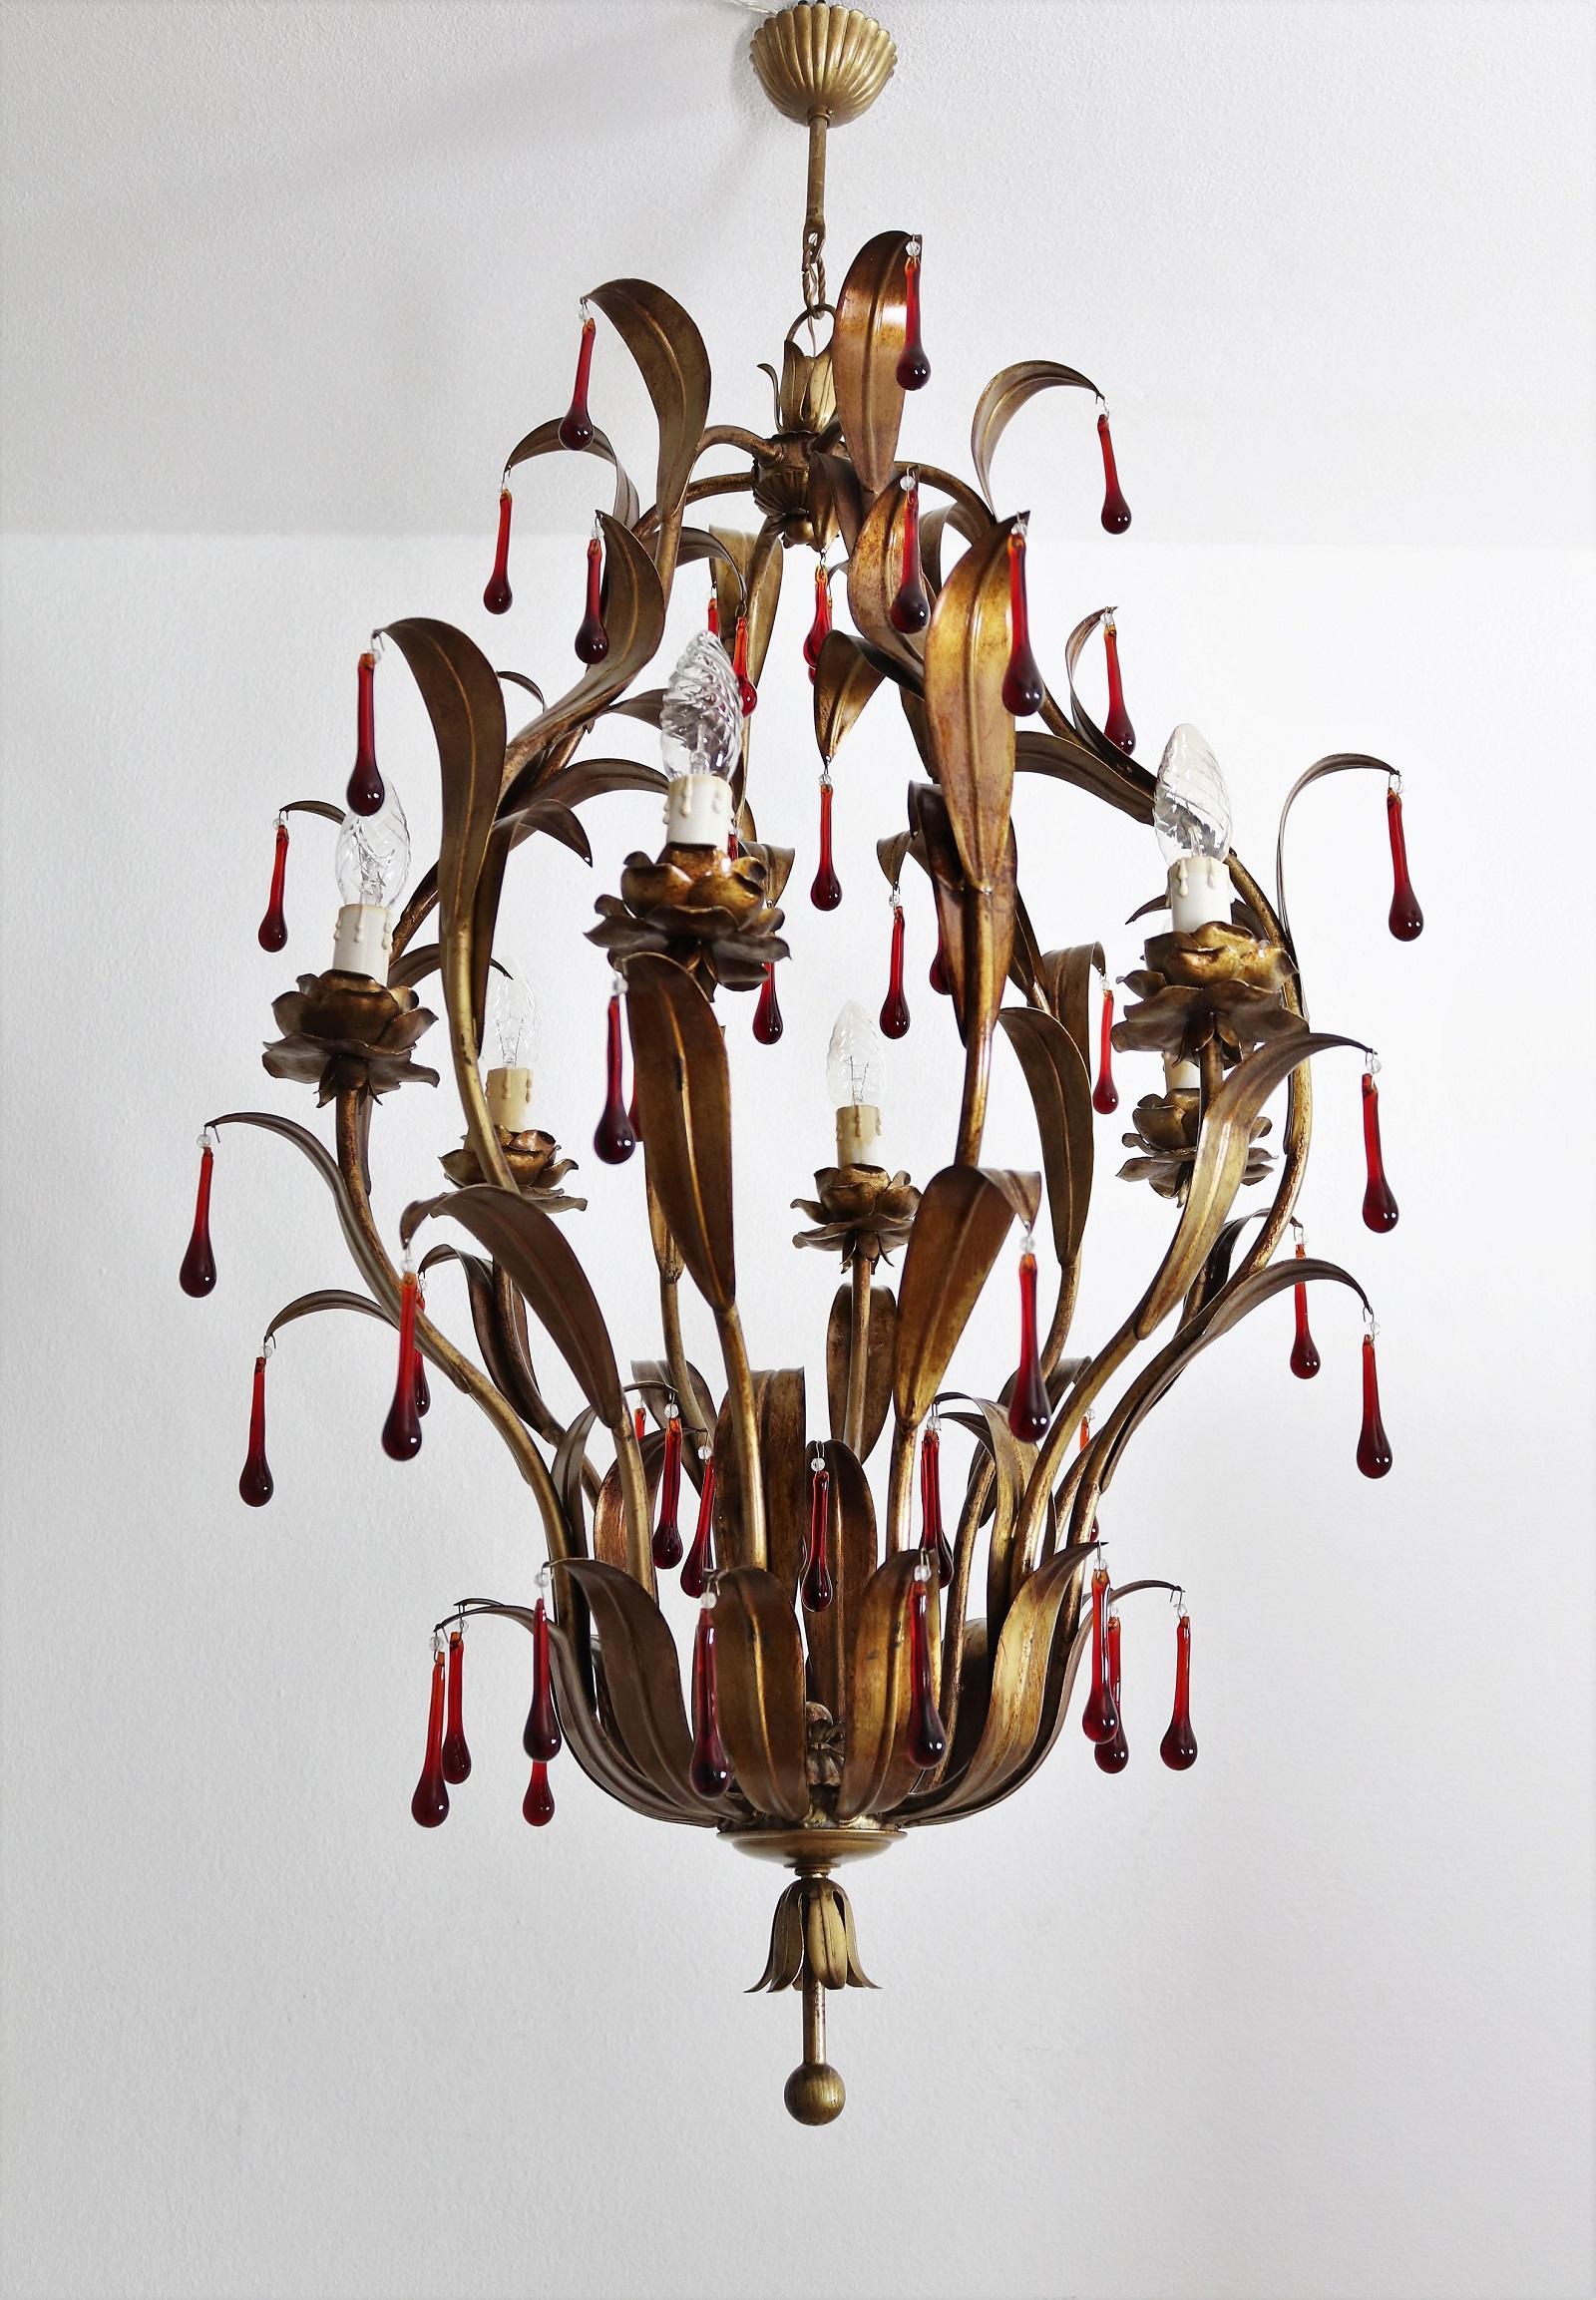 Italian Midcentury Gilt Florentine Chandelier with Red Murano Glass Drops, 1970s For Sale 12